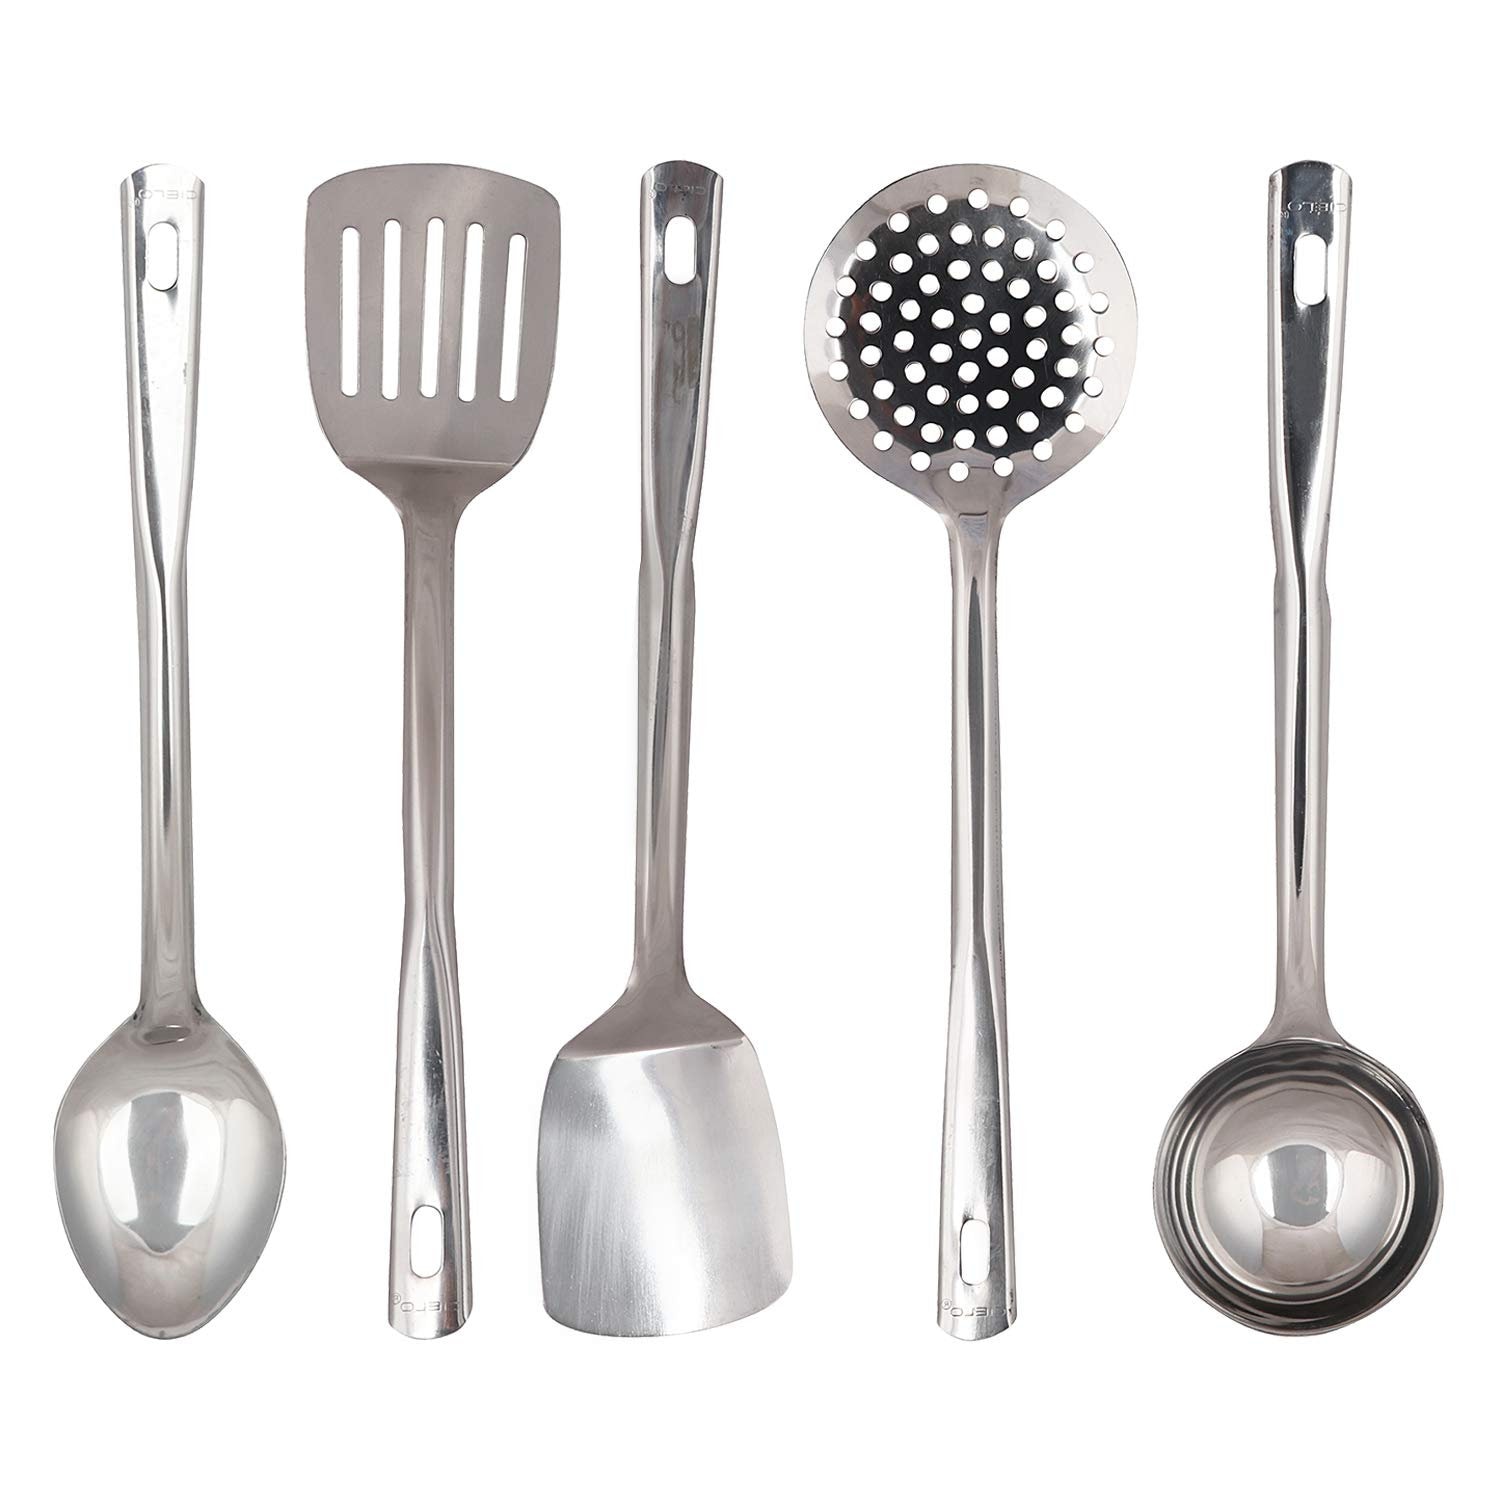 Stainless steel soup ladle spoon wooden handle asian cooking gadgets  skimmer turner kitchenware tools utensils set